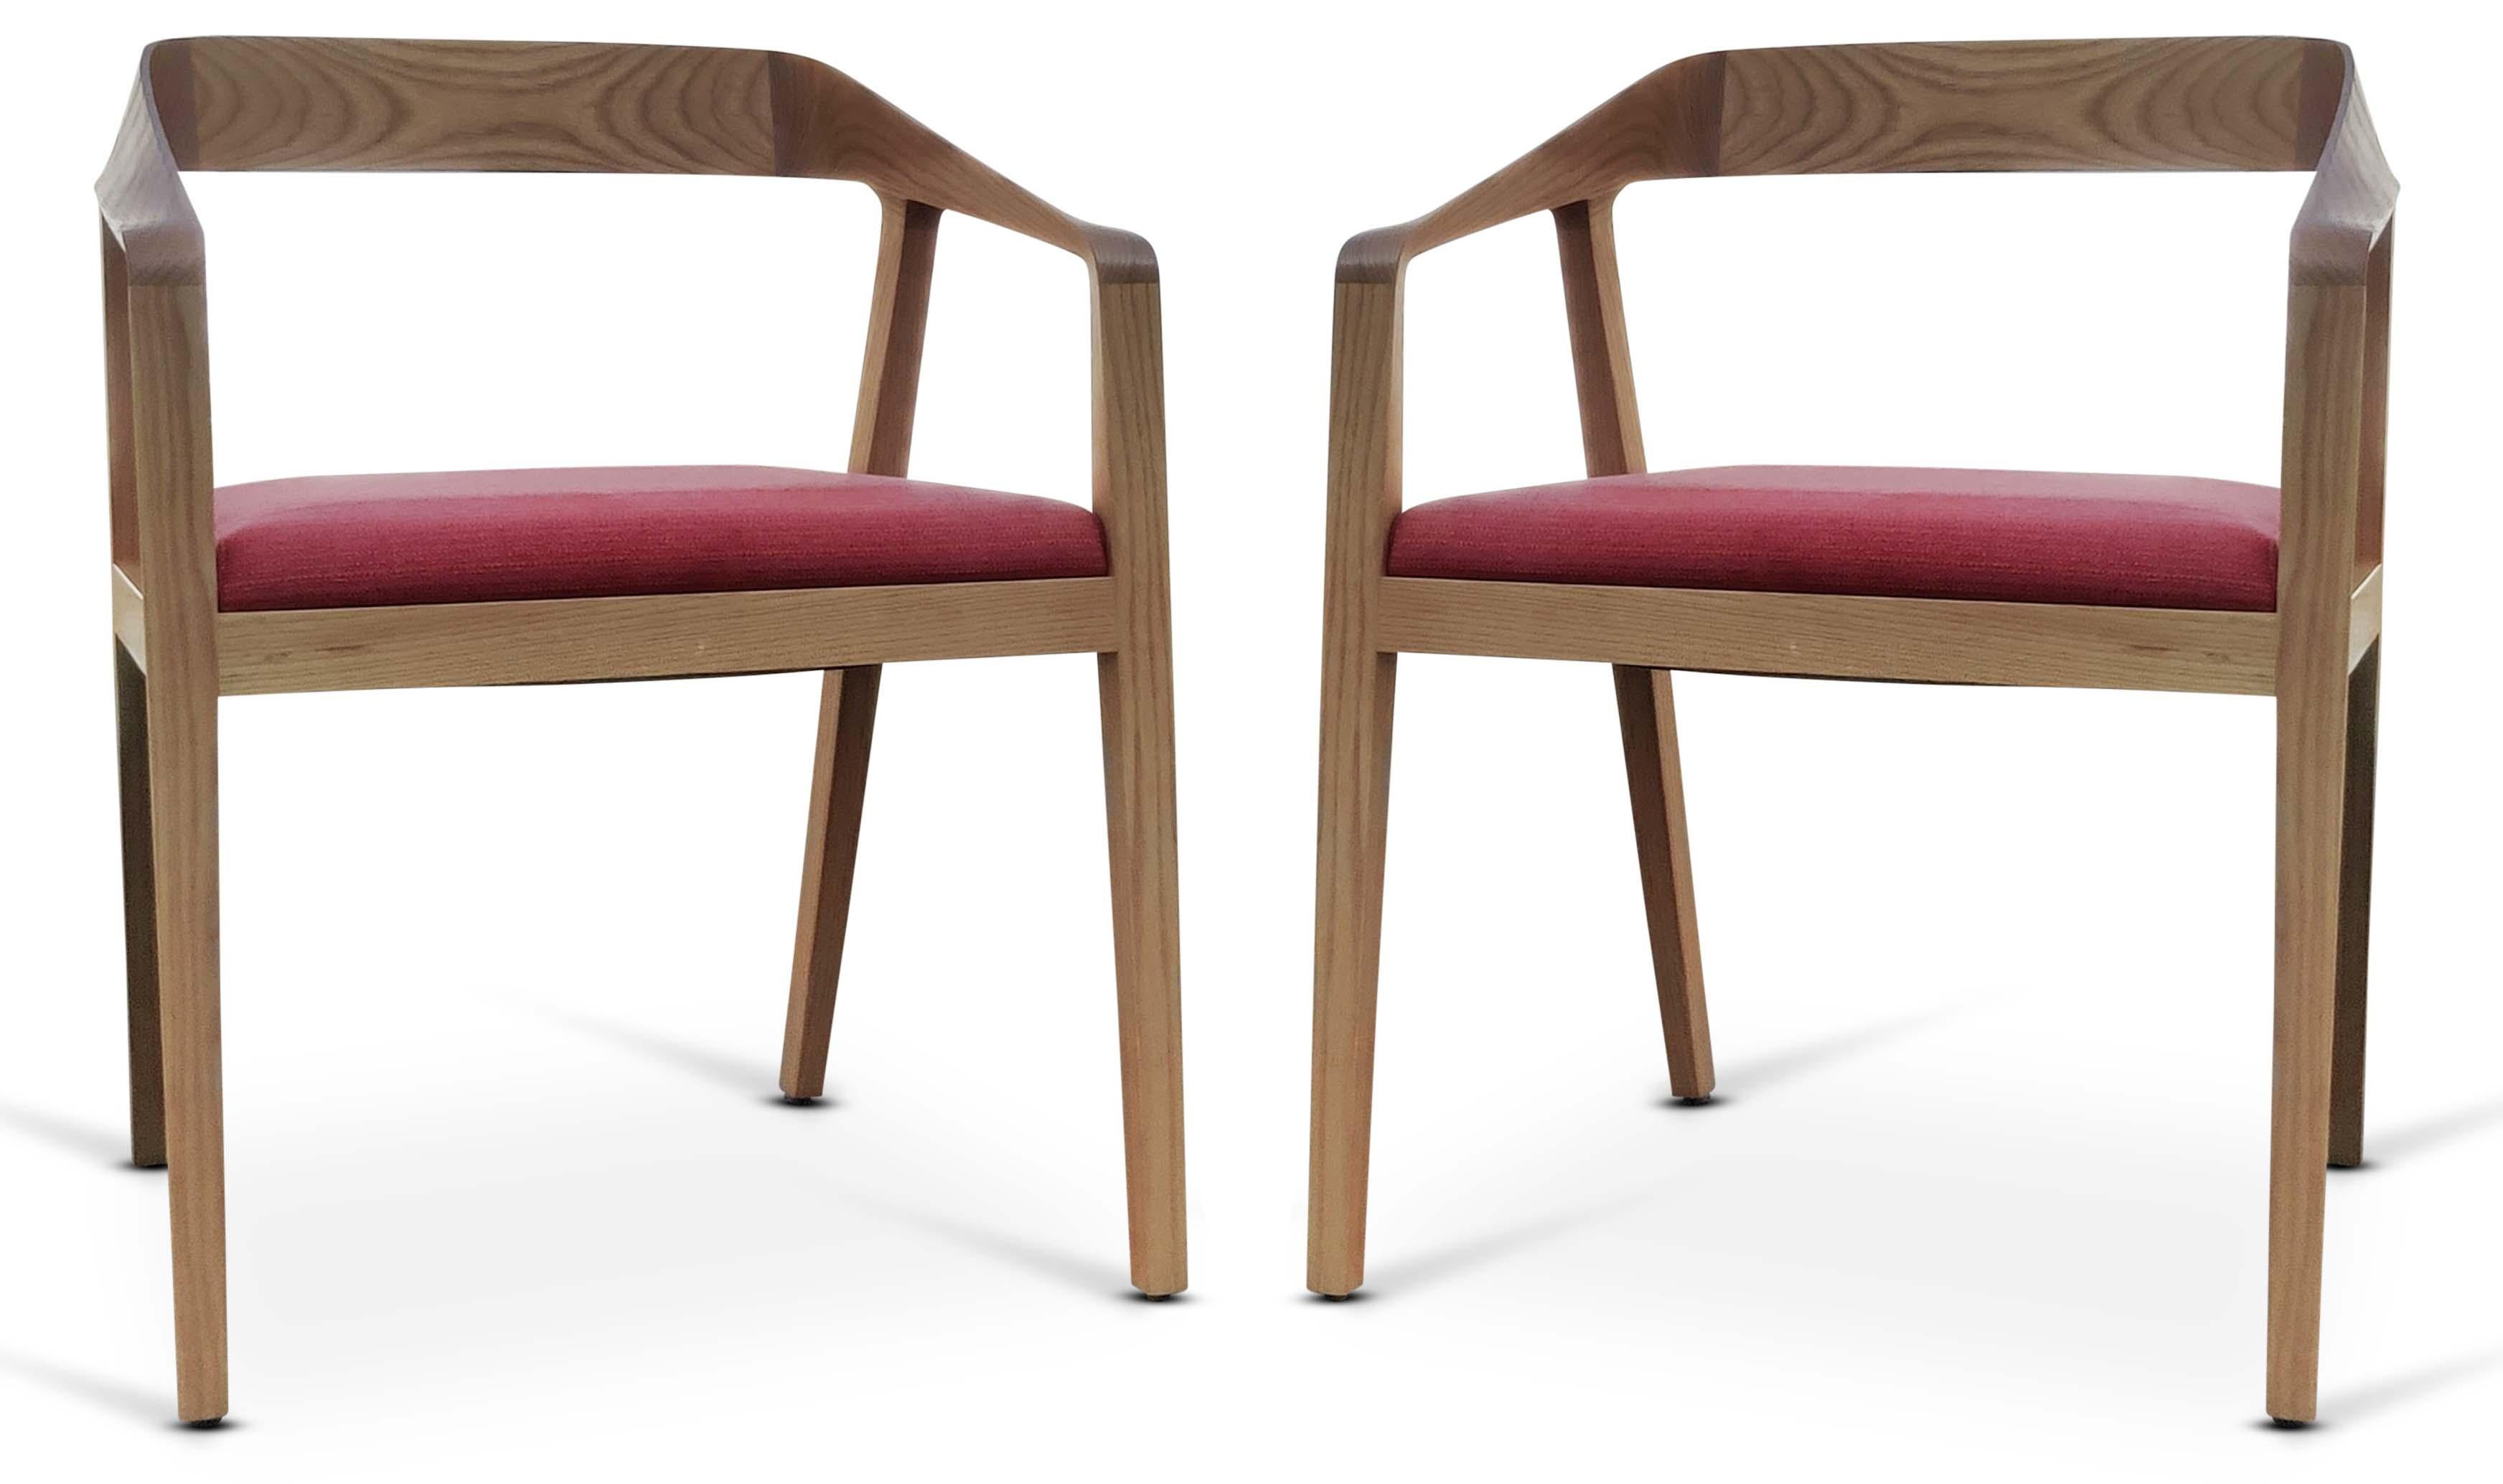 This pair of chairs was designed with a masterful eye. The solid maple wood construction has very modern and sleek lines, twisting and turning. The pieces of the frame meld together, with sculpted ribbons of wood that flow seamlessly from the front